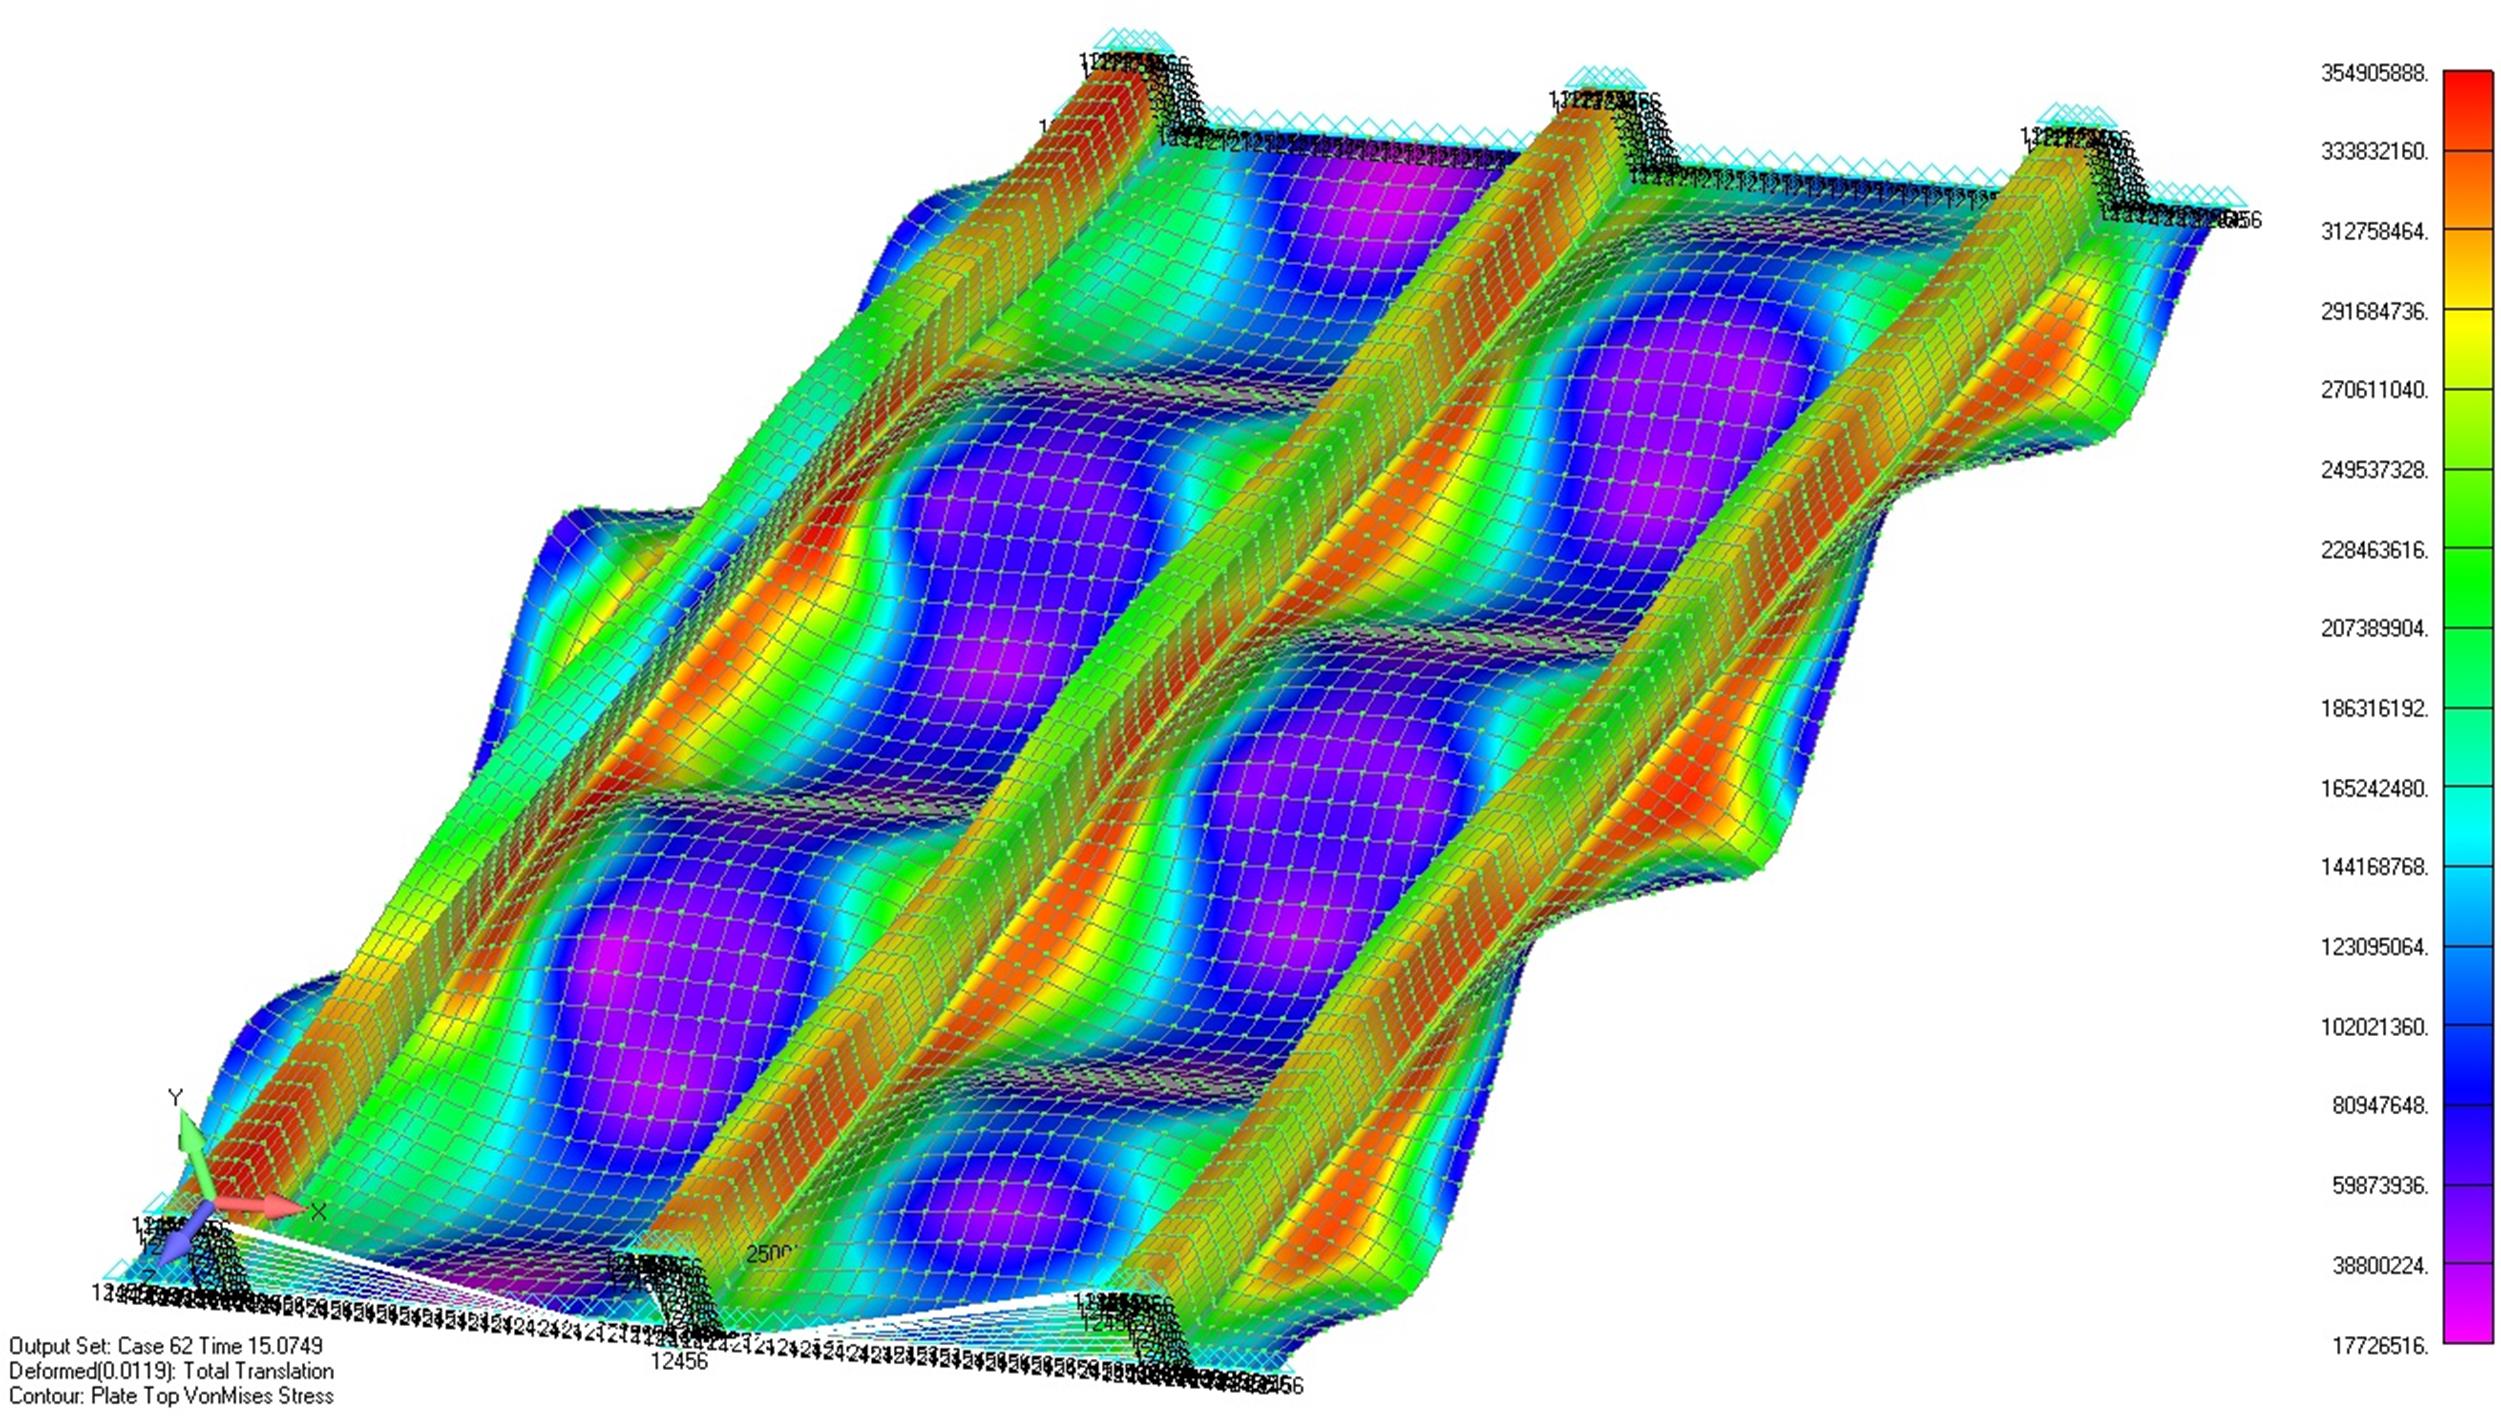 Basic structure simulation for determination of a component-adapted joint design.